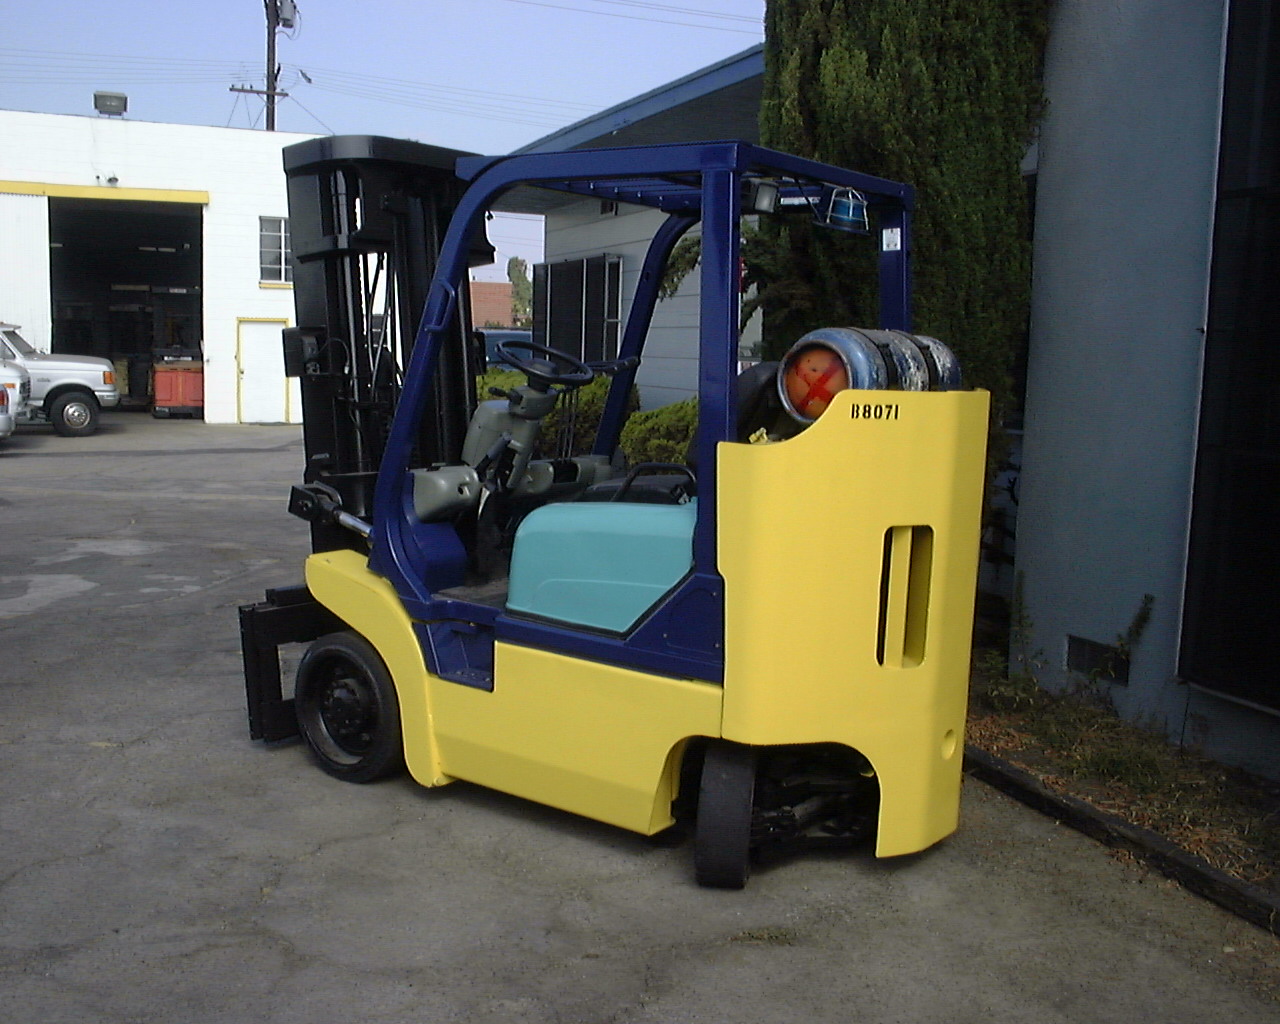 Click here for forklift service,lift trucks,pallet trucks,electric forklift,forklift certification and forklifts